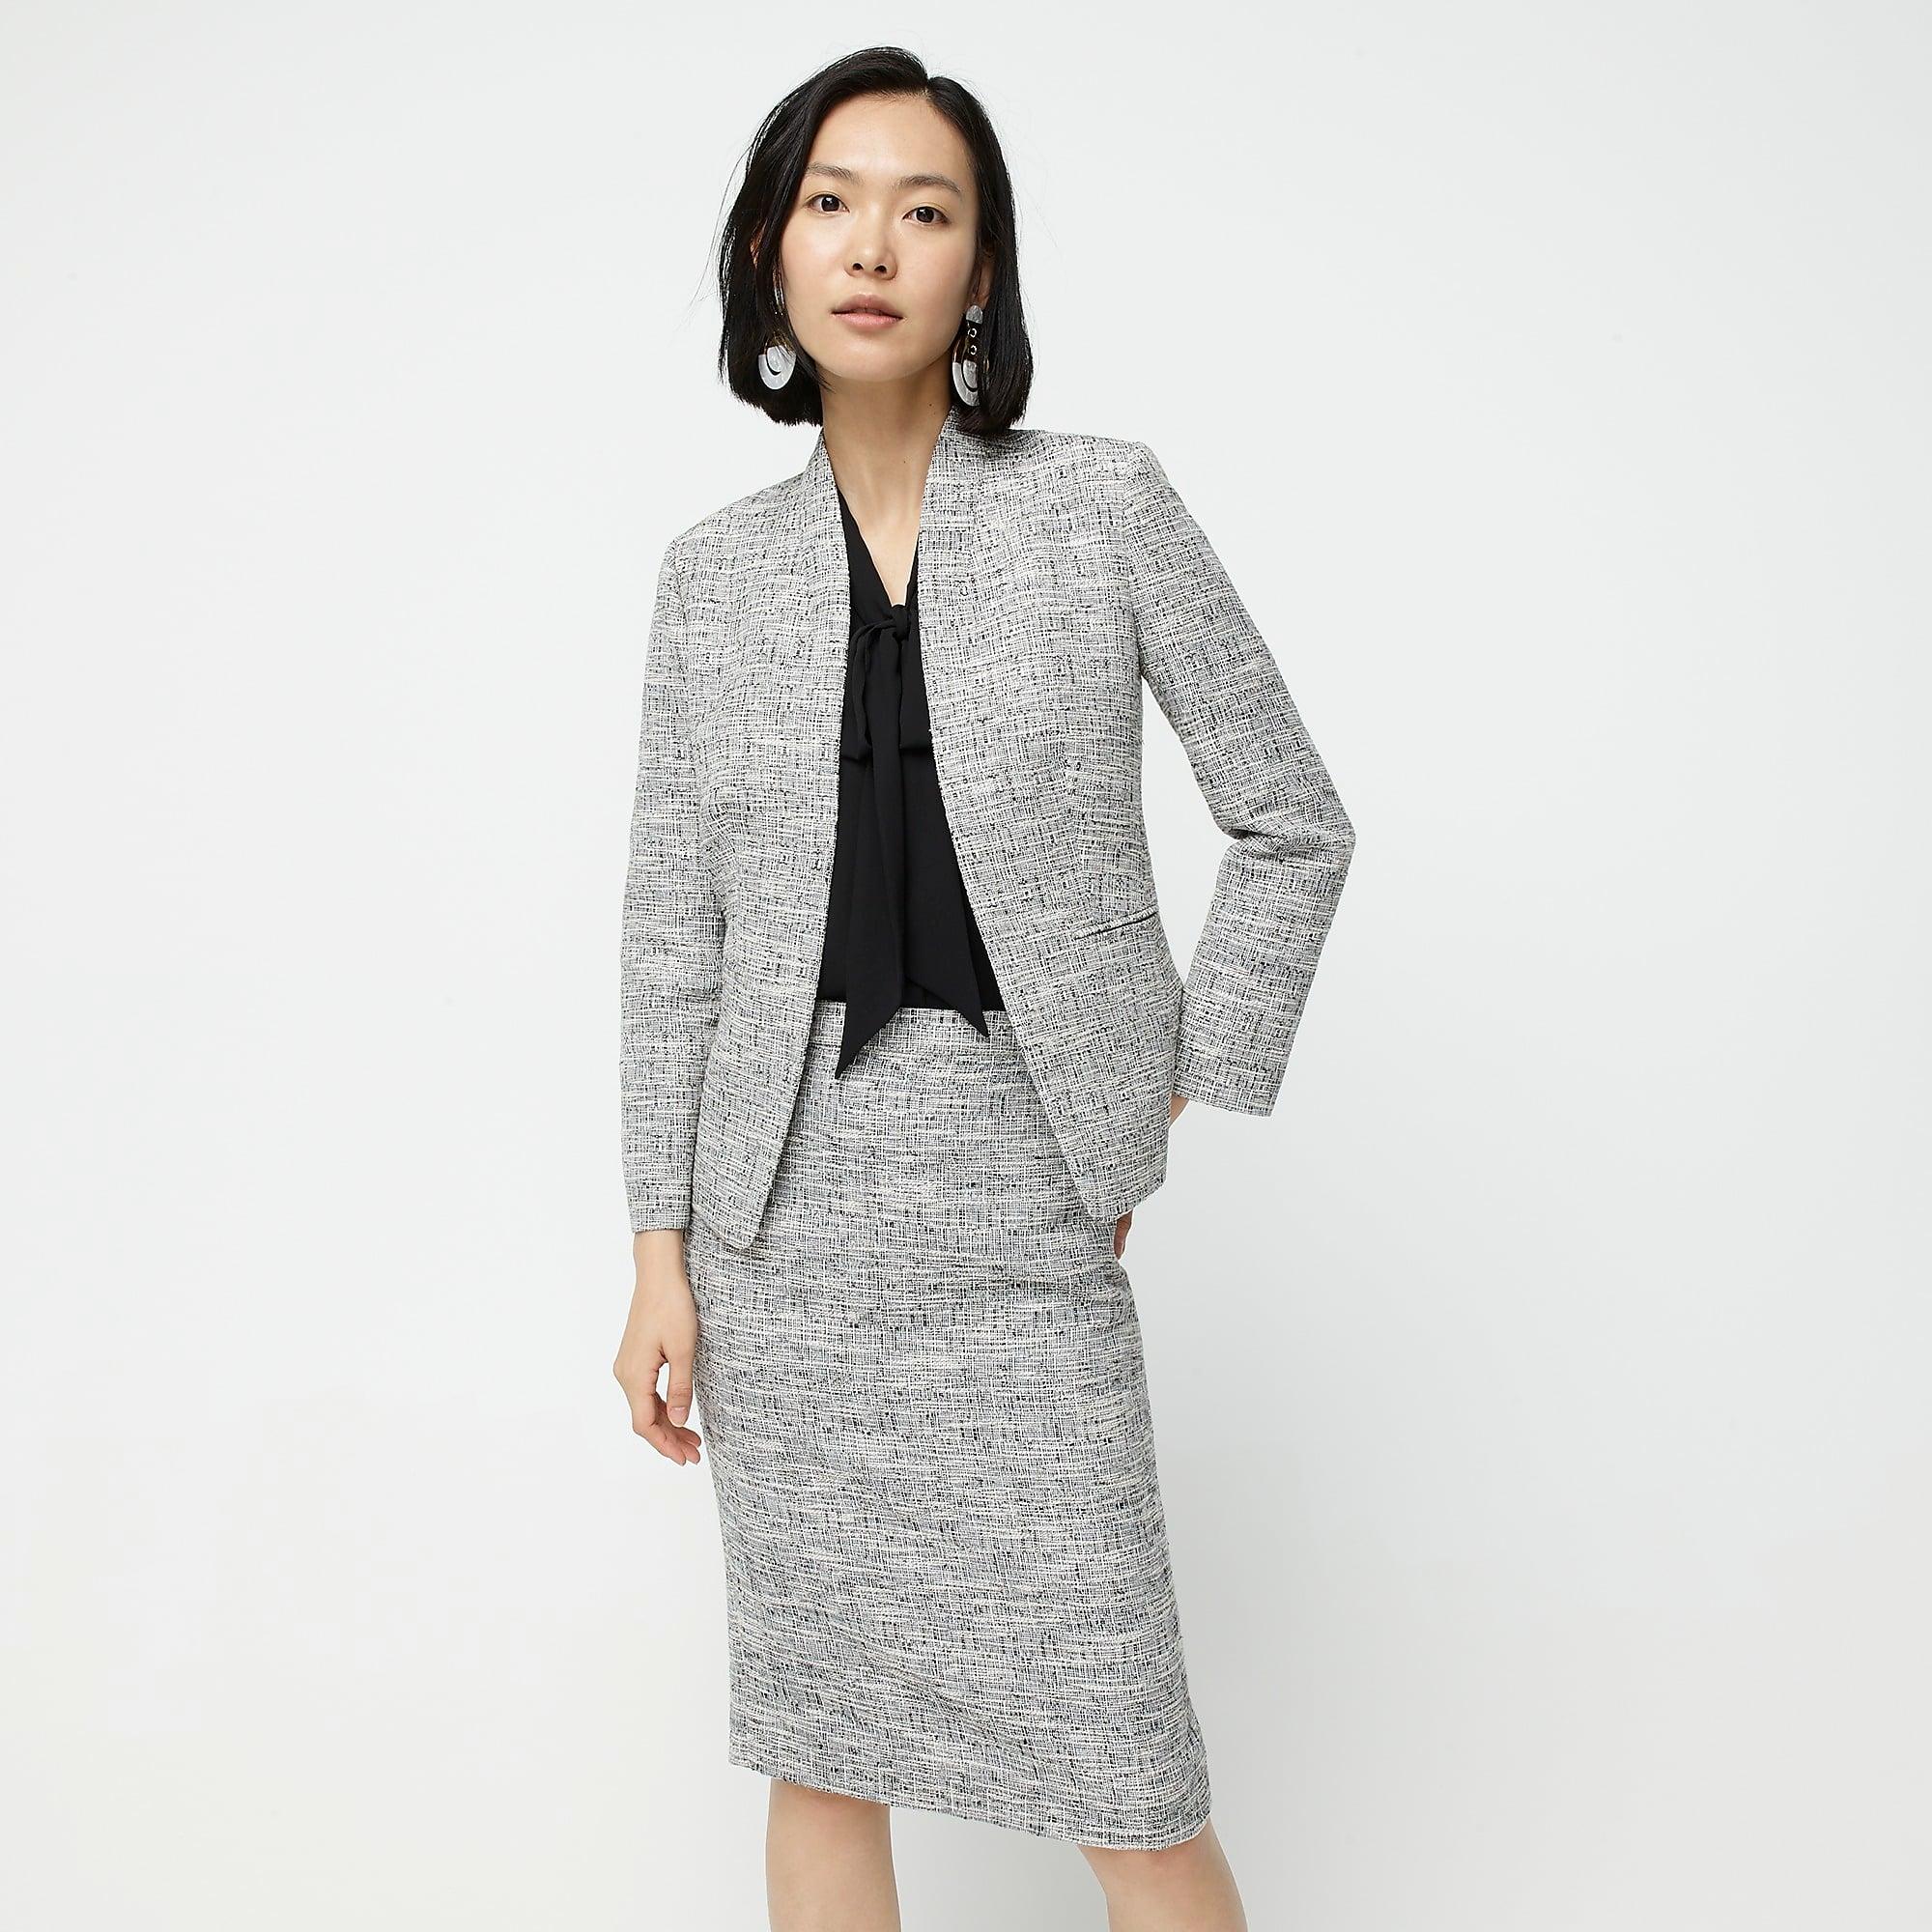 J.Crew Going-out Blazer In Black-and-white Tweed - Lyst